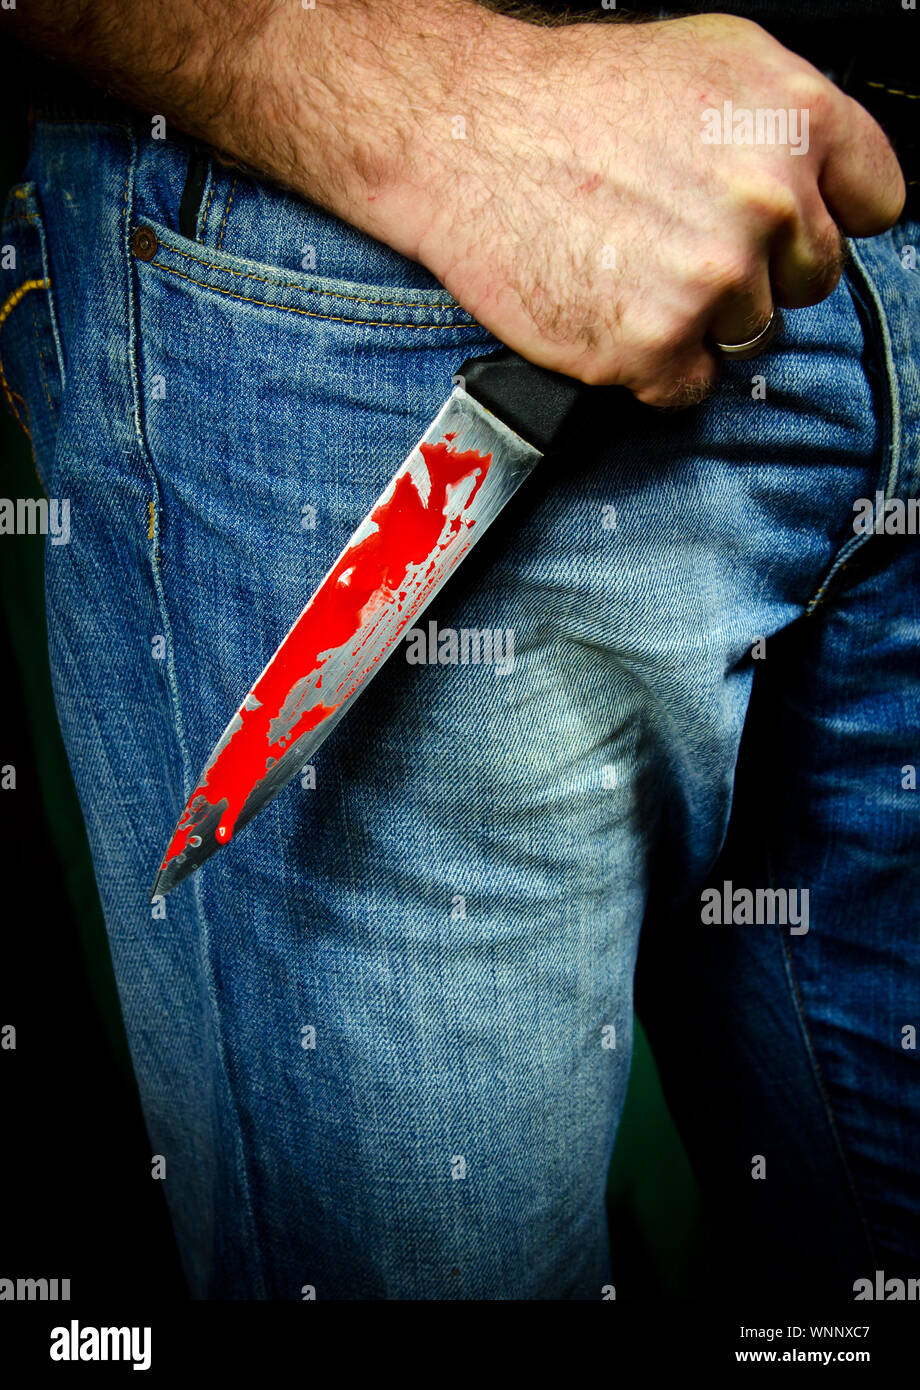 Midsection Of Murderer Holding Blooded Knife Stock Photo